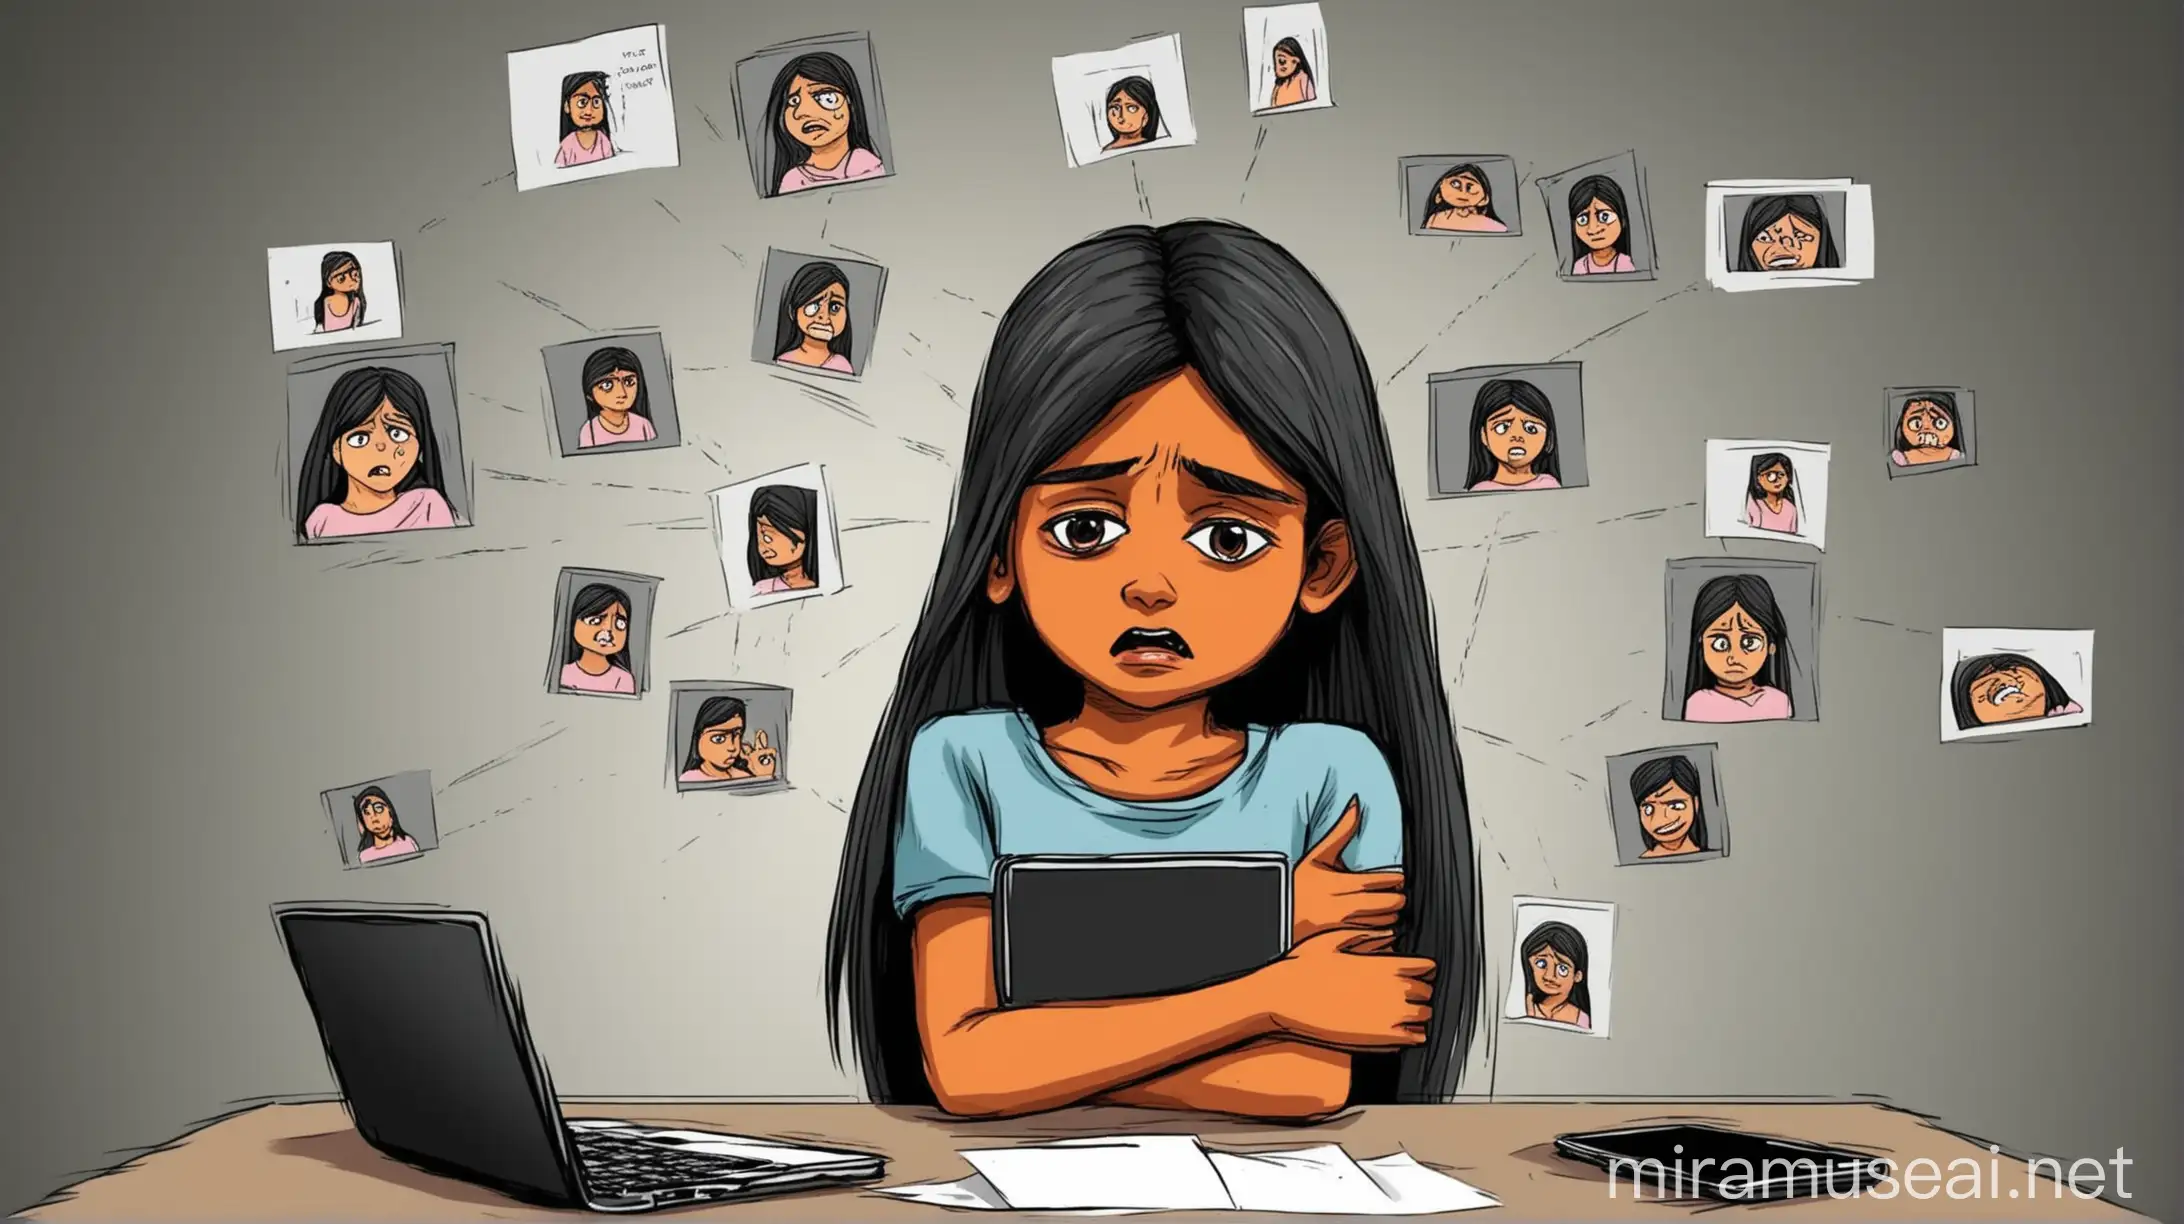 create illustration of cyber bulling with 12 years old indian girl child